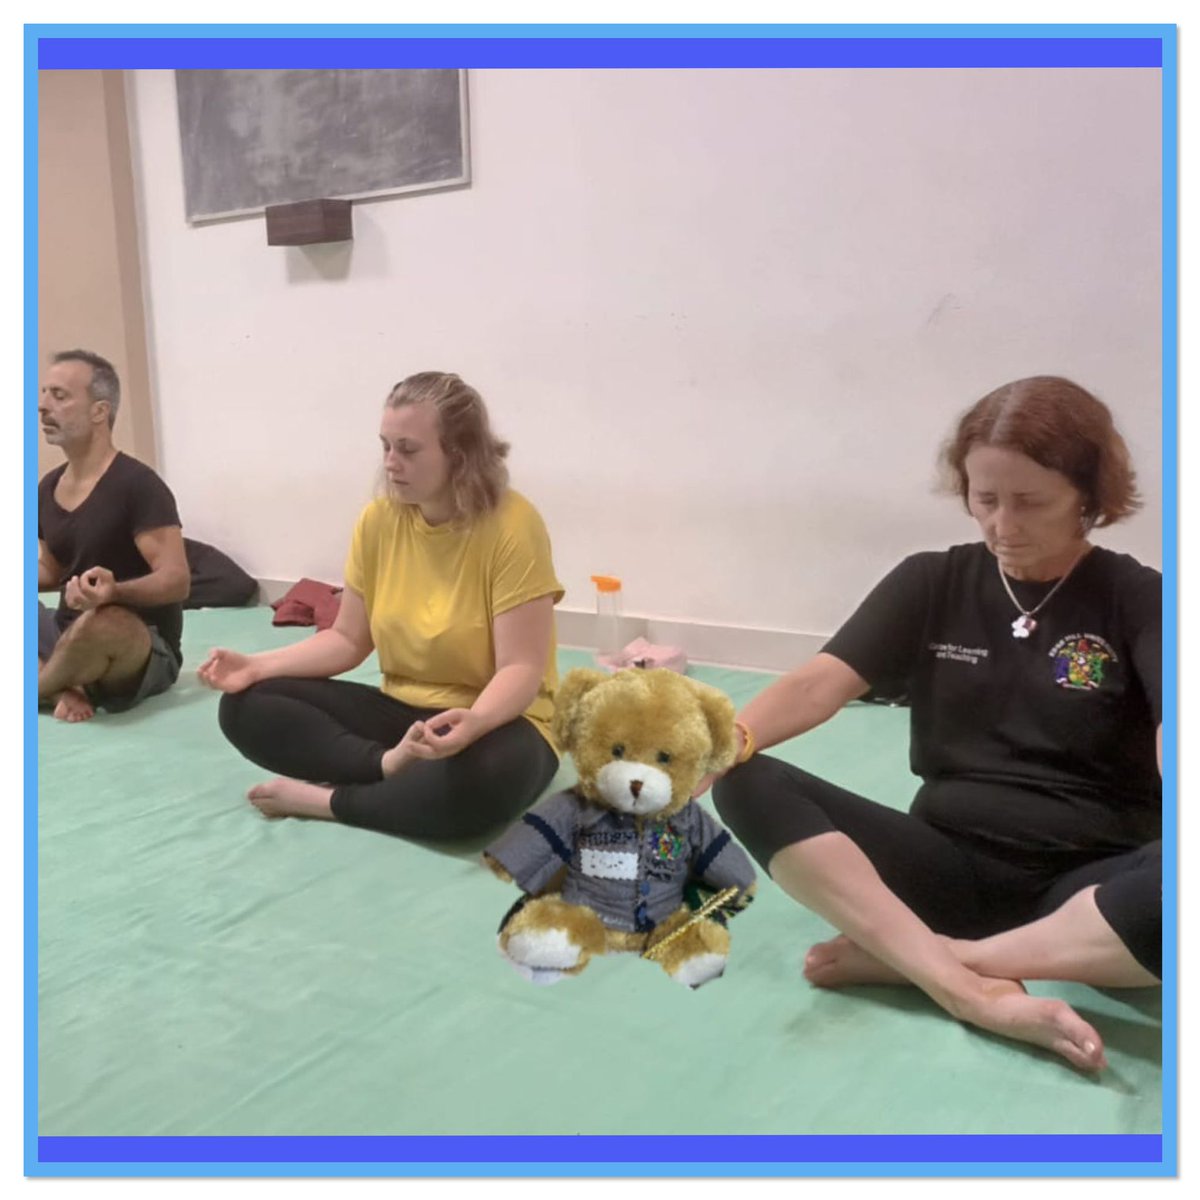 So this morning I am with my mentor learning how to do Yoga. I understand that it is important for student nurses to take care of themselves. So do you think that Stan is doing well? @NursingTimes #SNTABear